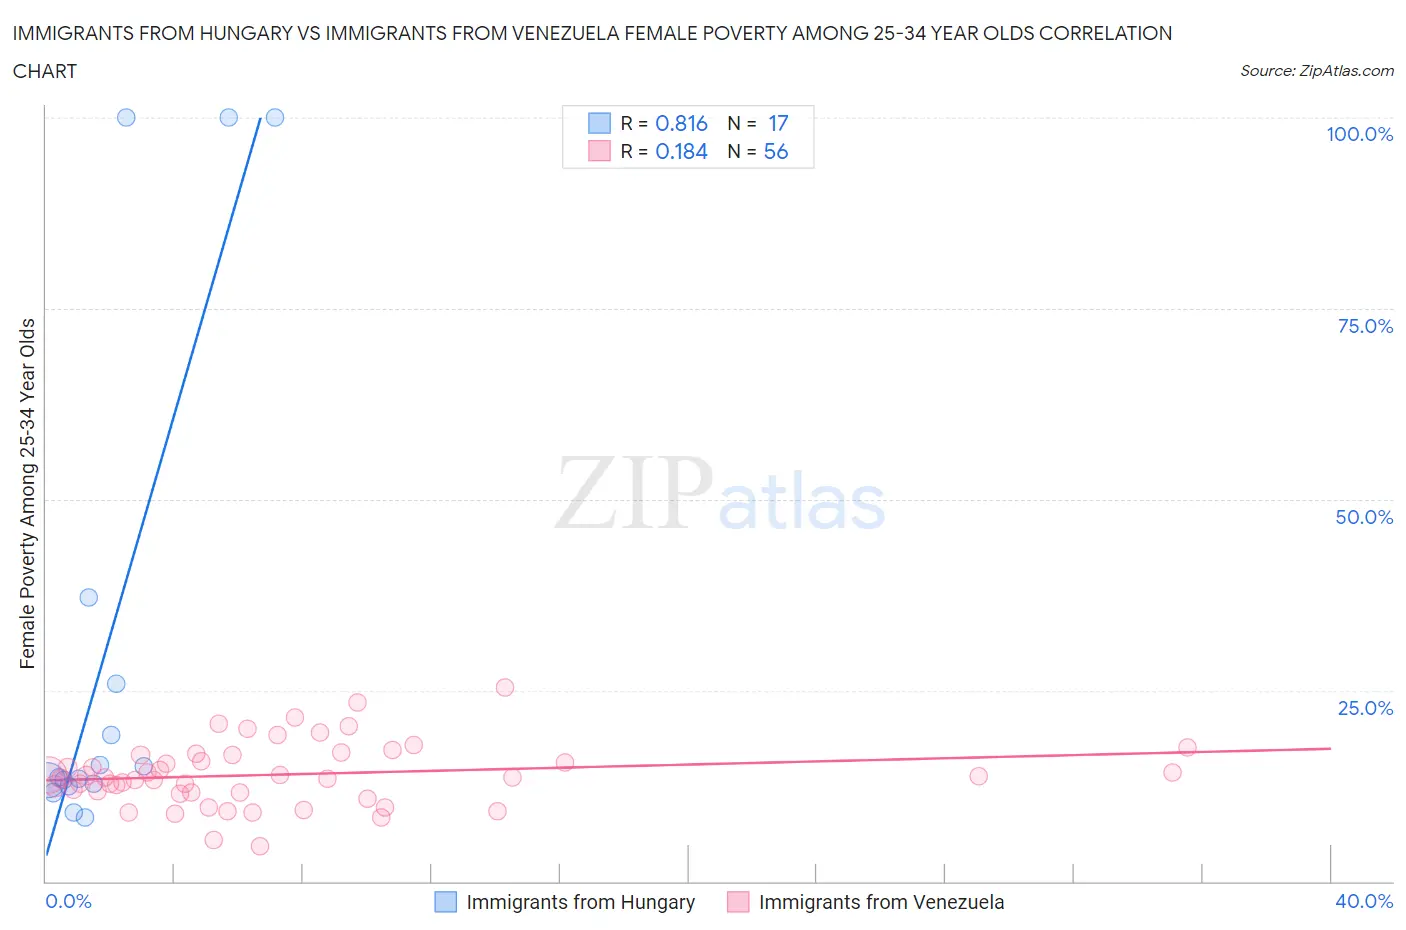 Immigrants from Hungary vs Immigrants from Venezuela Female Poverty Among 25-34 Year Olds